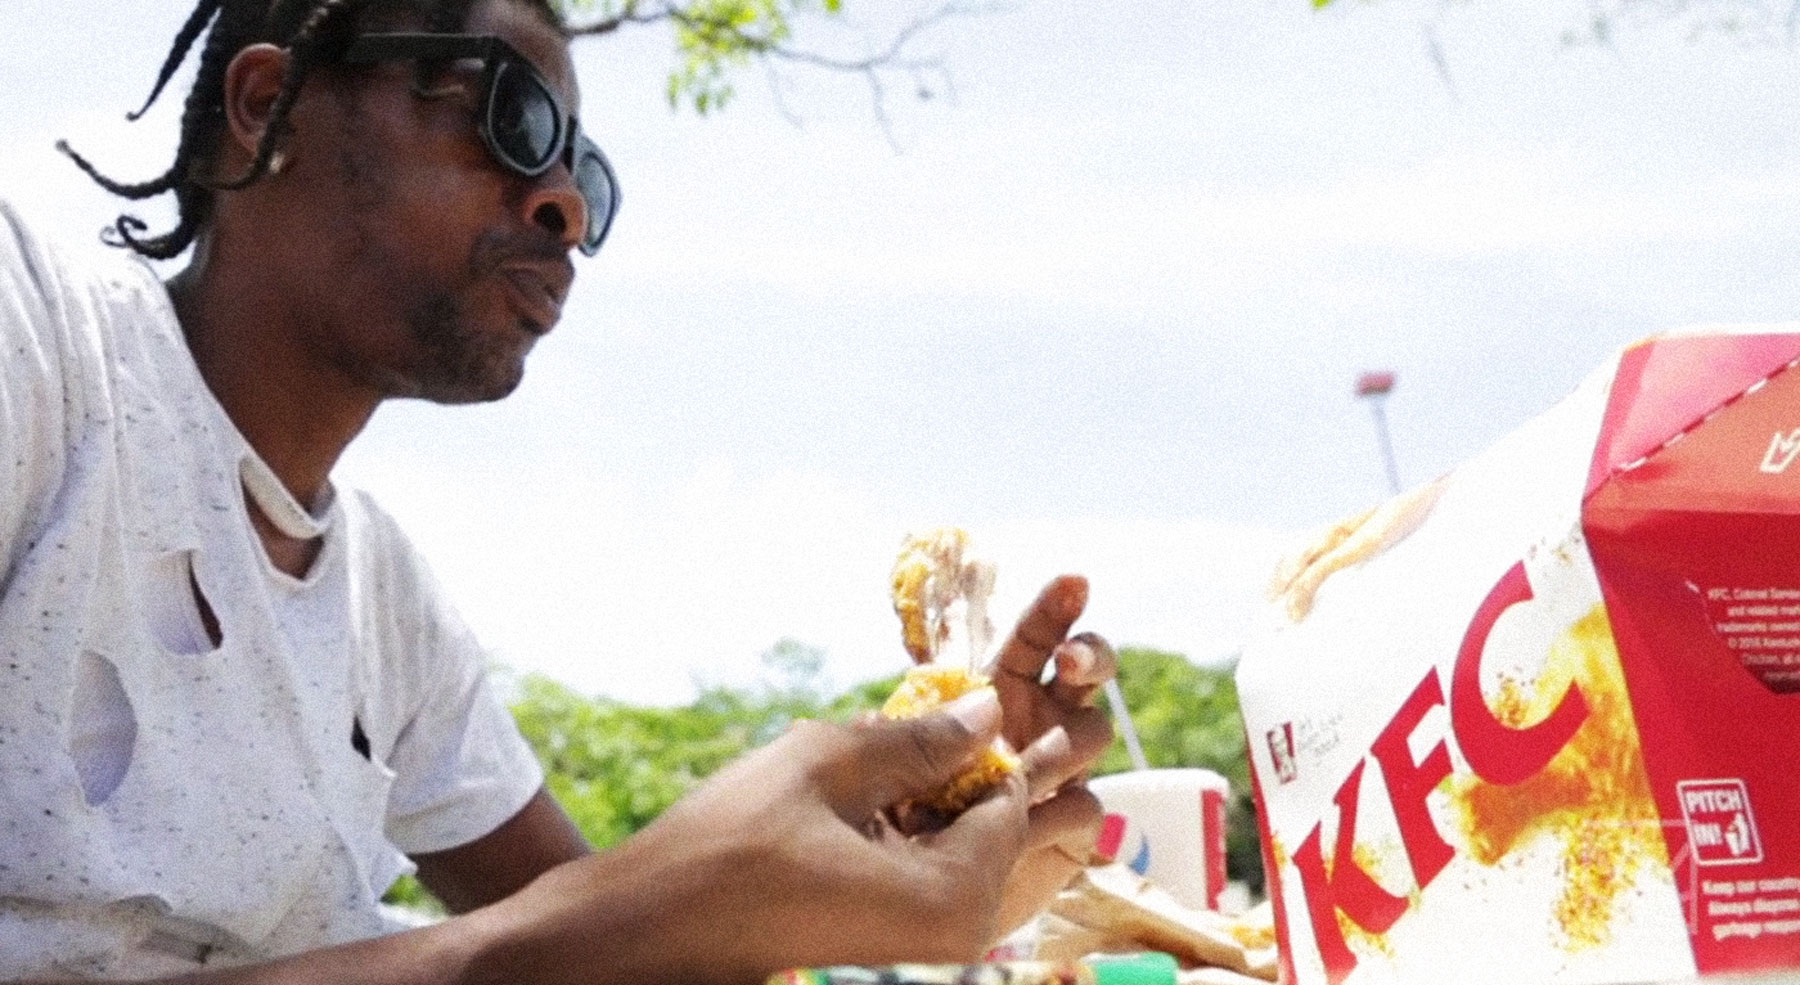 Why Does Jamaica Have the Best KFC in the World?